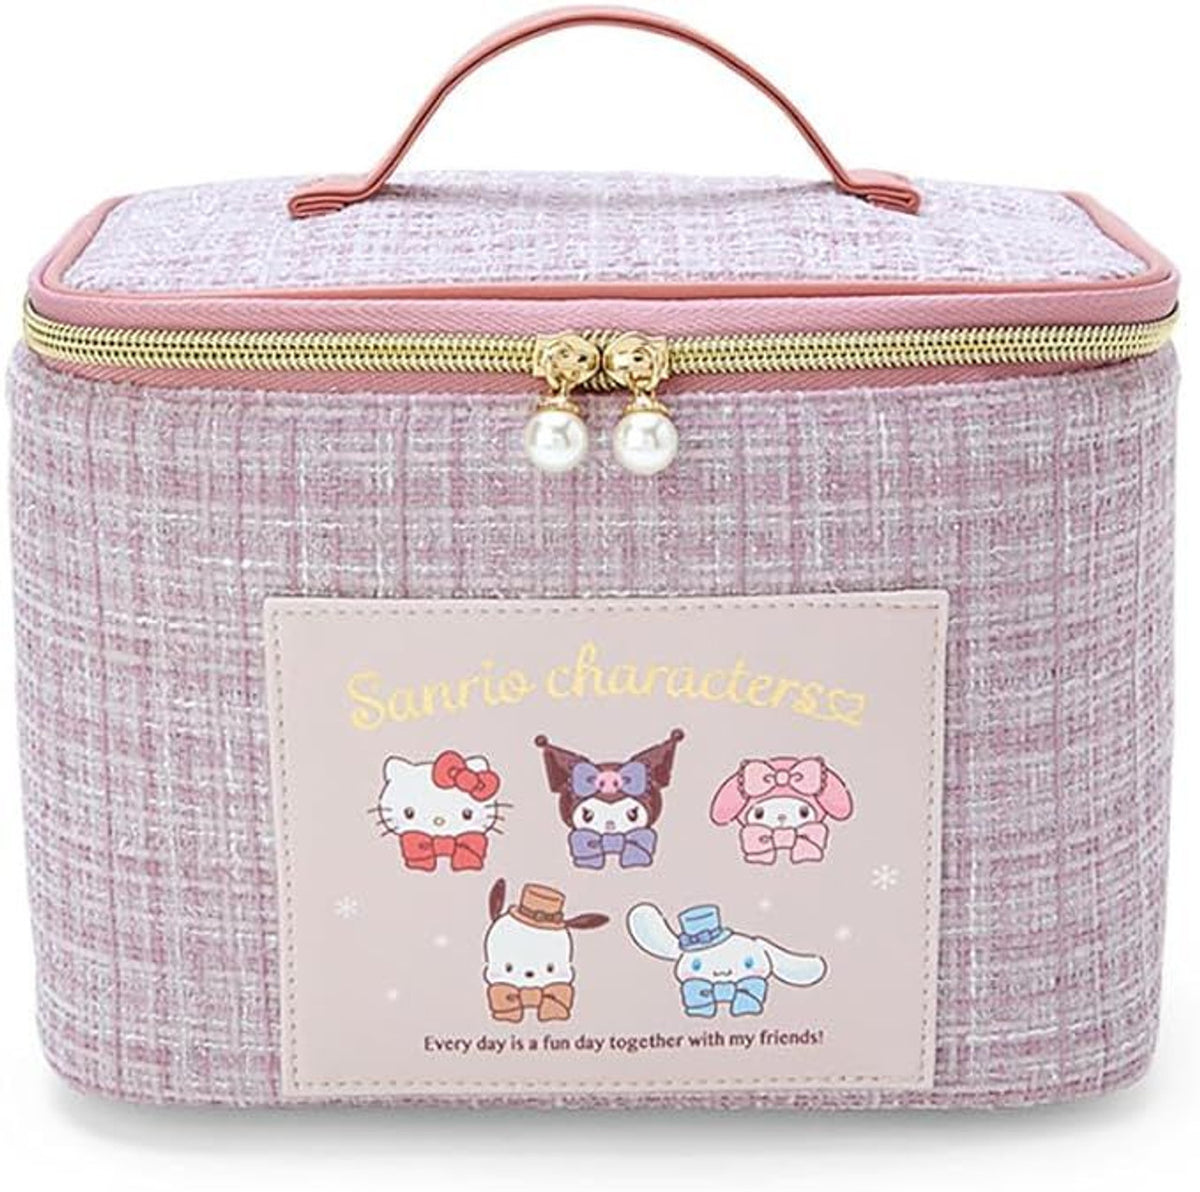 Cosmetic Vanity Case - Sanrio Winter Outfits (Limited Japan Edition)